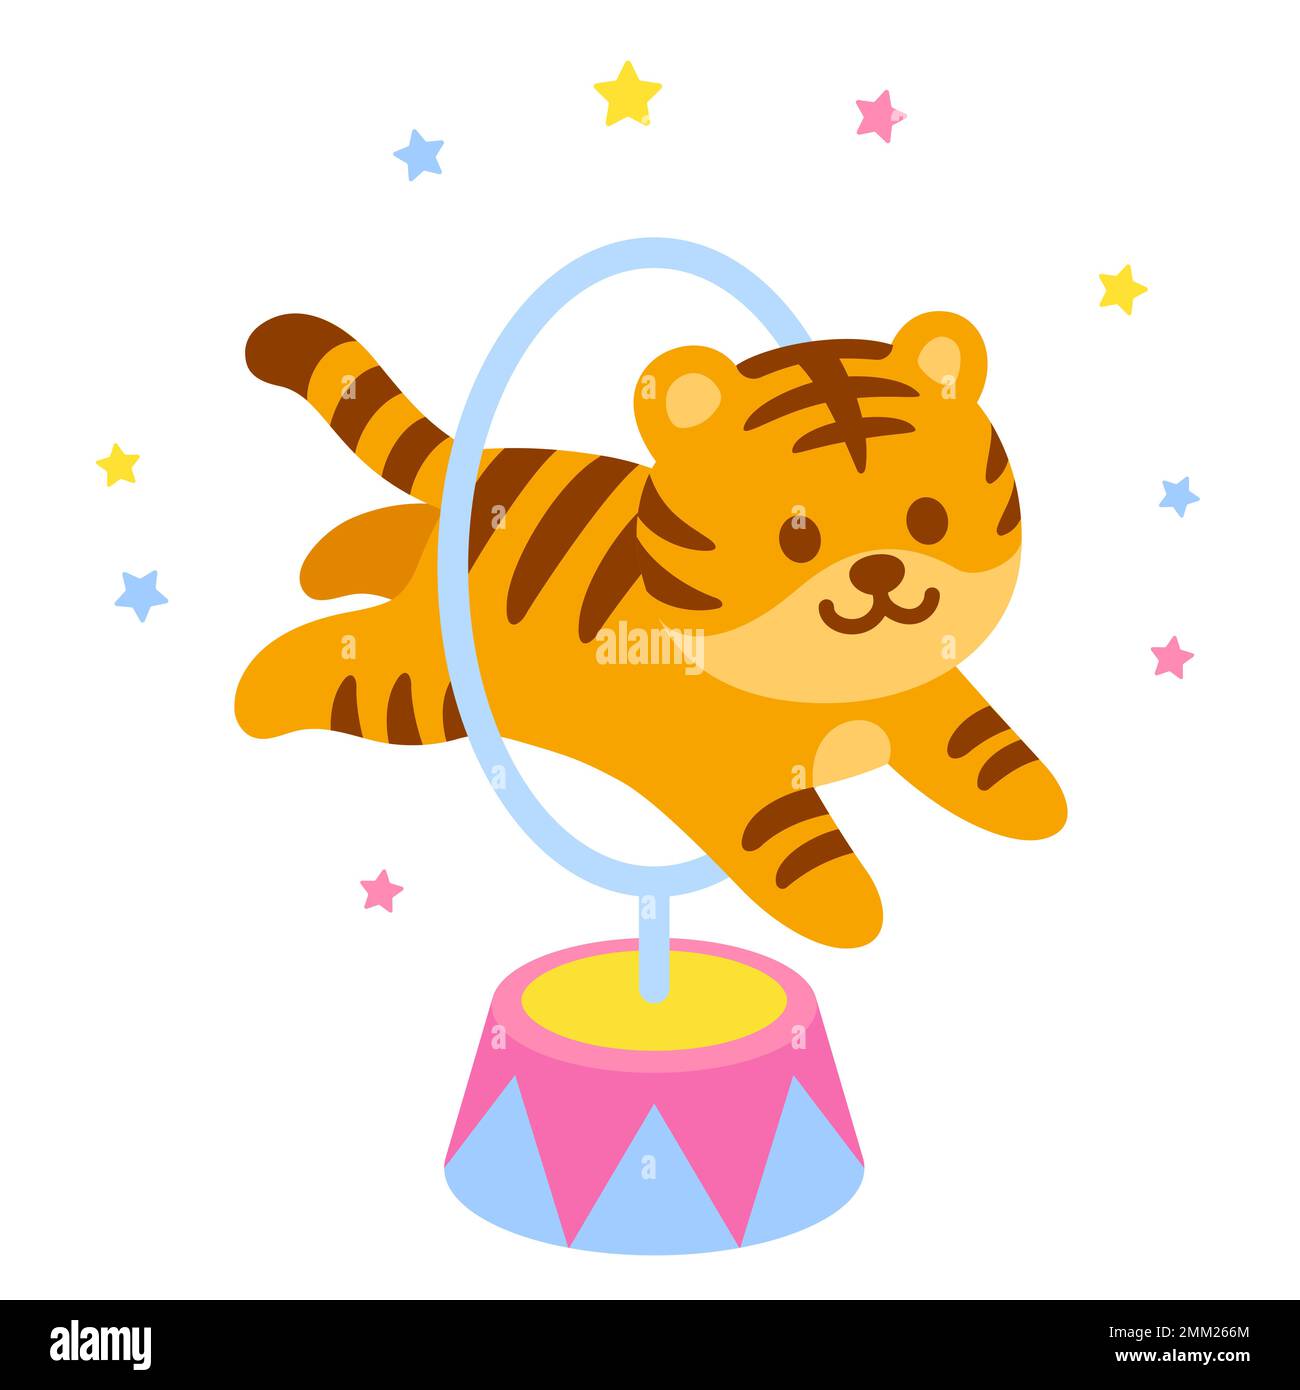 Cartoon circus tiger jumping through hoop. Cute and funny circus performance vector illustration, children's book drawing. Stock Vector